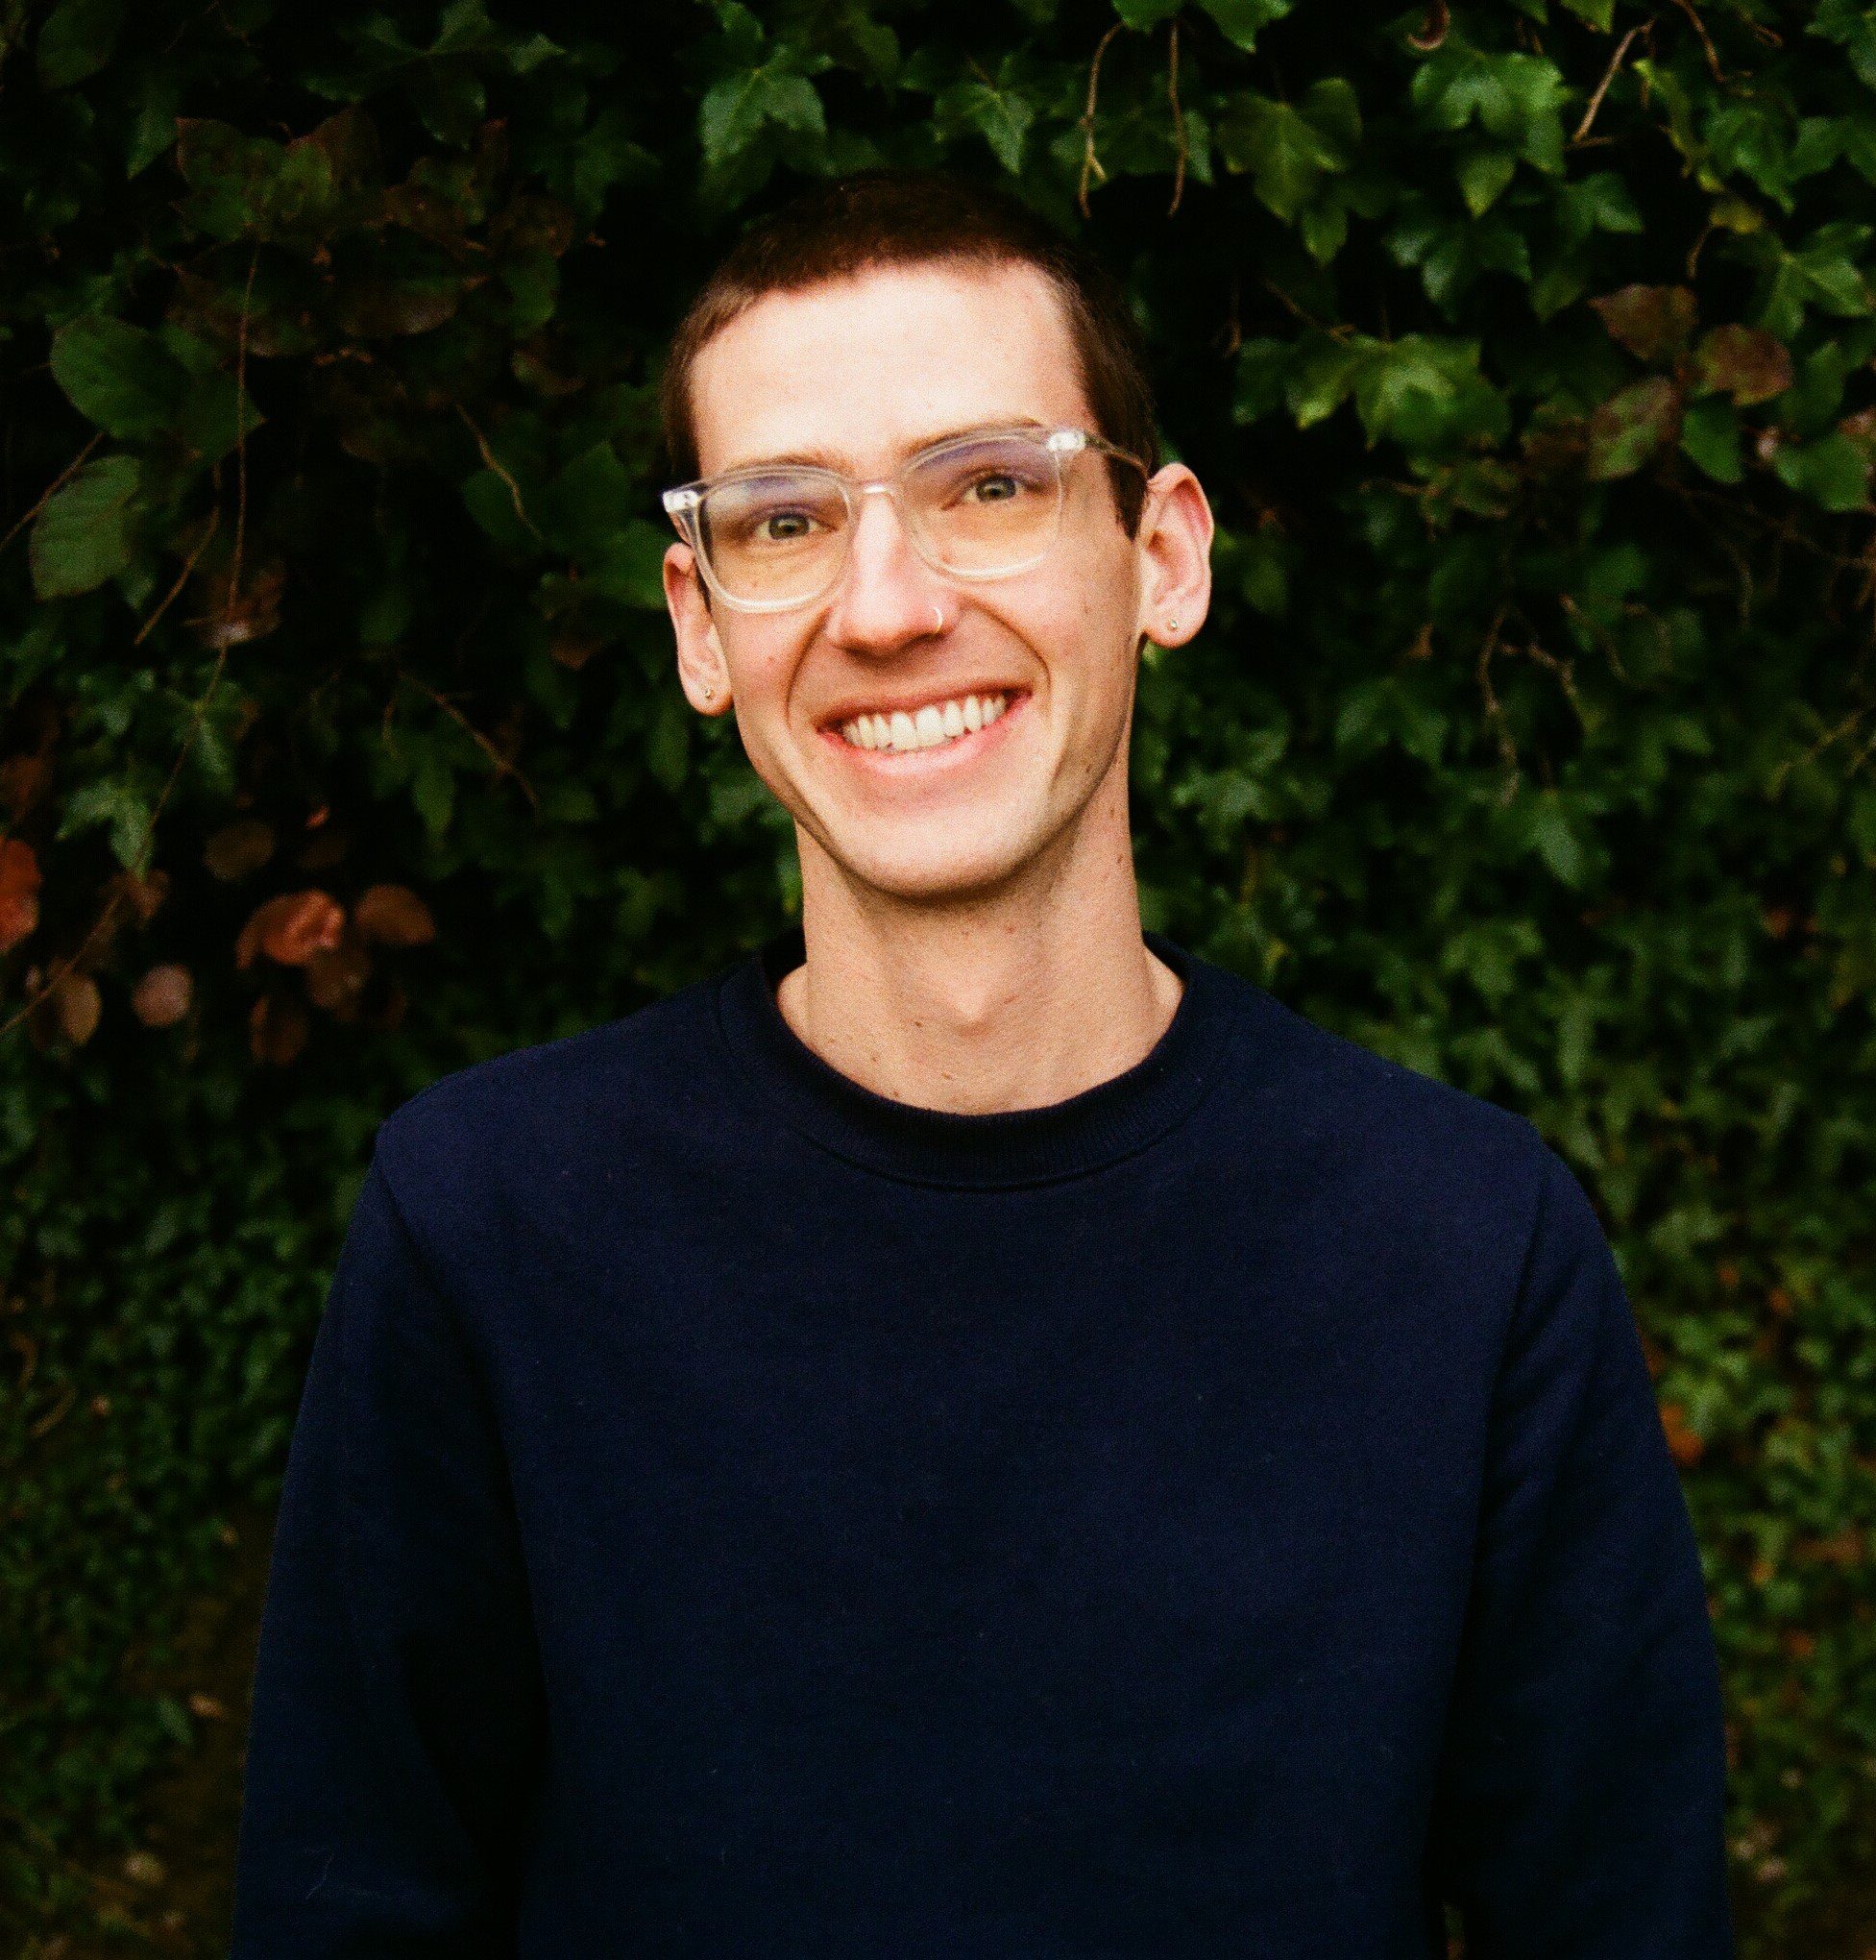 Kevin Steen's headshot. Kevin smiles in front of a wall of leaves. Kevin wears clear glasses, a dark long sleeved shirt, and short cropped brown hair.